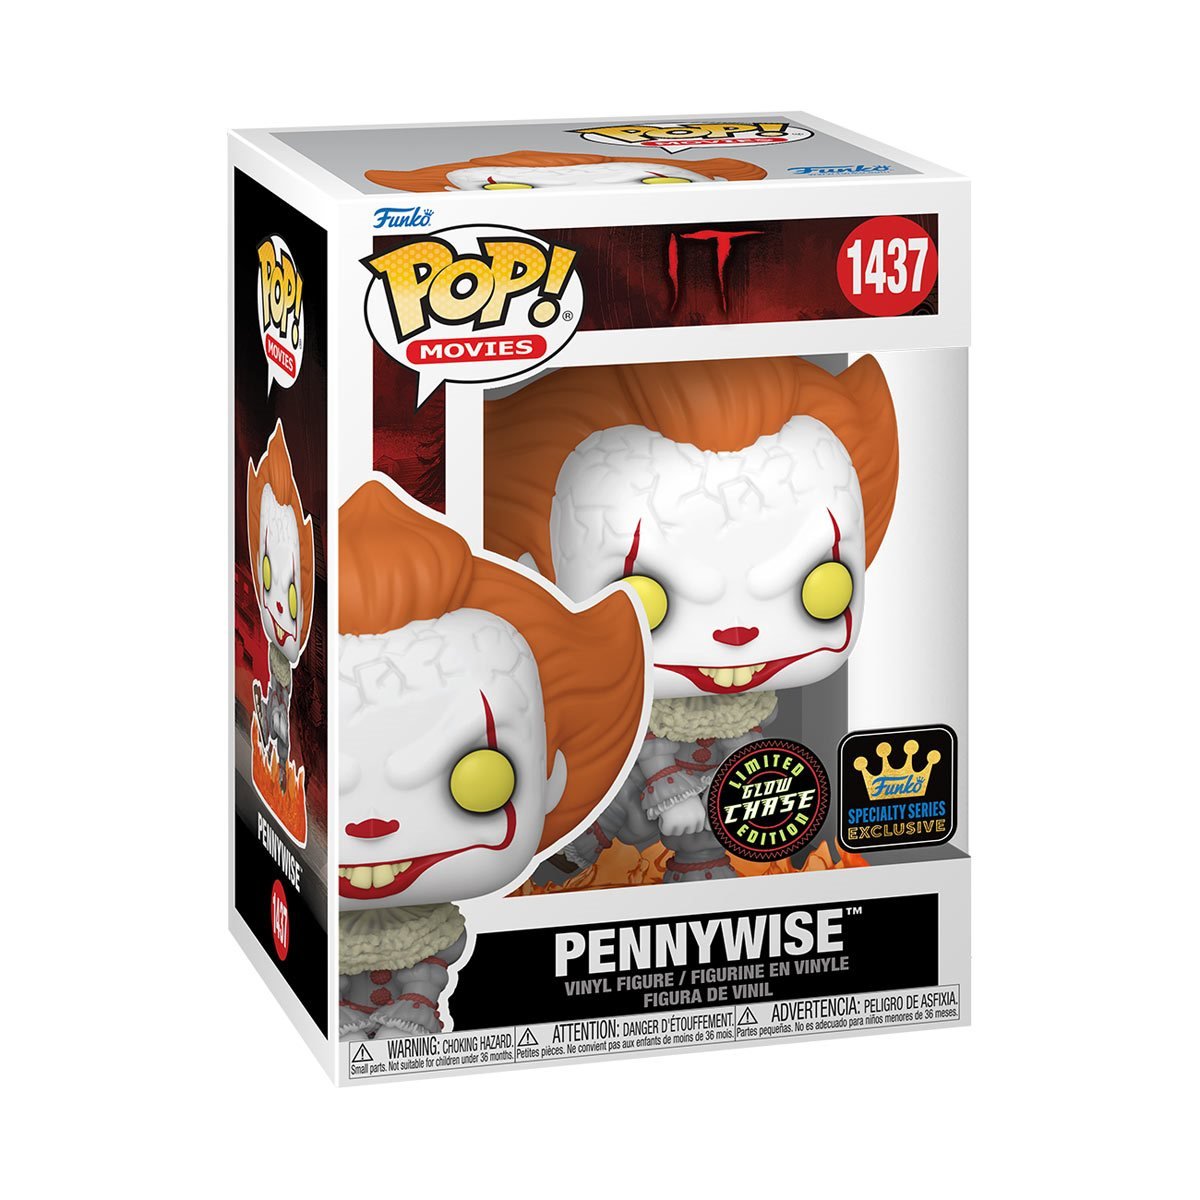 POP! Movies It Pennywise CHASE #1437